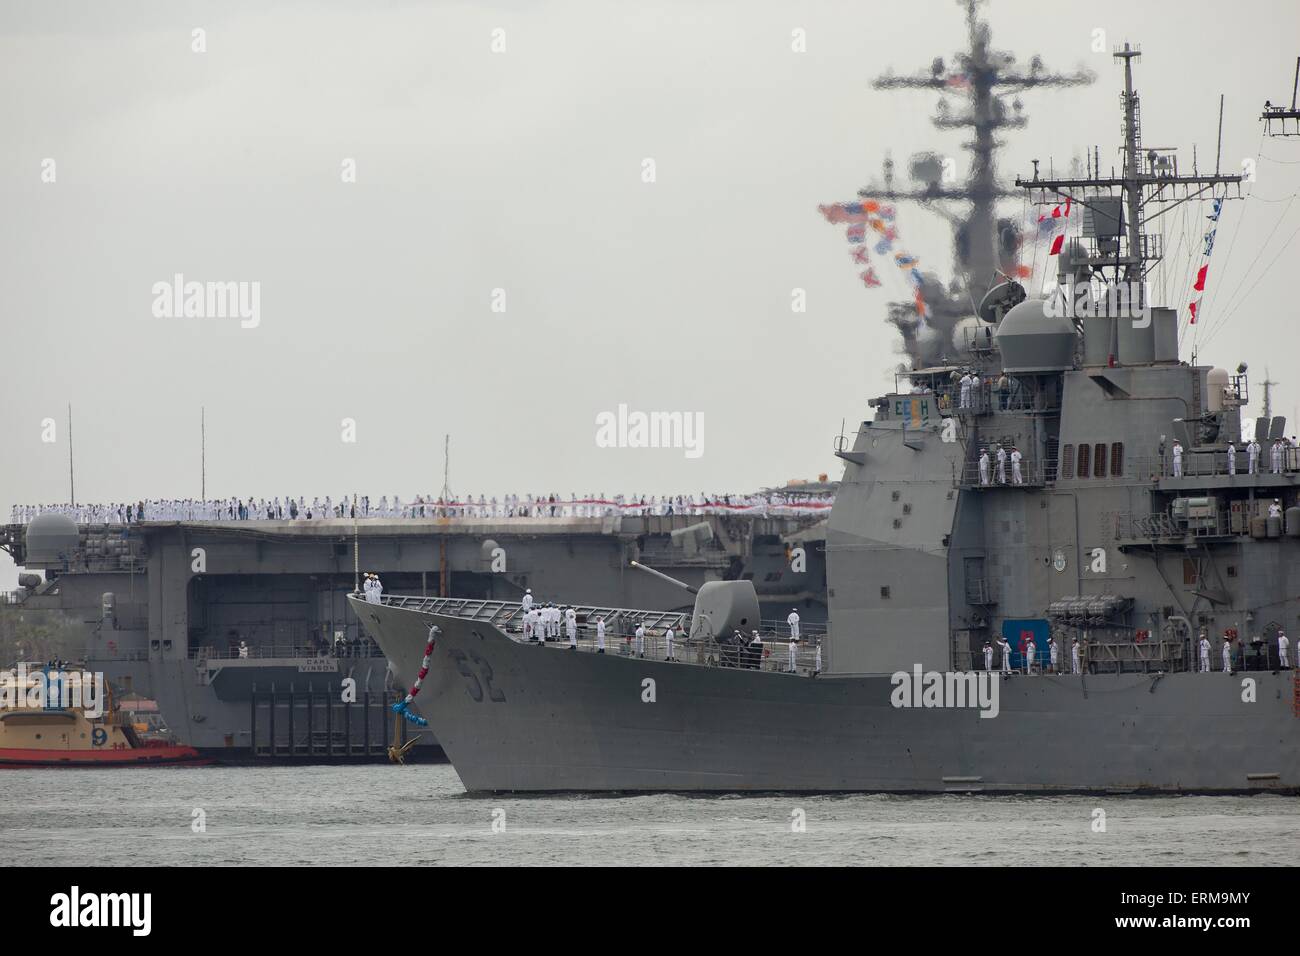 Coronado, CA, US. 4th June, 2015. USS Carl Vinson(CVN 70) Carrier Strike Group Comes Home. The Carl Vinson Strike Group returns to the San Diego area after a nearly 10-month deployment to U.S. 5th Fleet and 7th Fleet that included six months of strikes against the Islamic State.Seen here: Guided-missile cruiser USS Bunker Hill (CG-52) in foreground with the Carl Vinson docking. © Daren Fentiman/ZUMA Wire/Alamy Live News Stock Photo